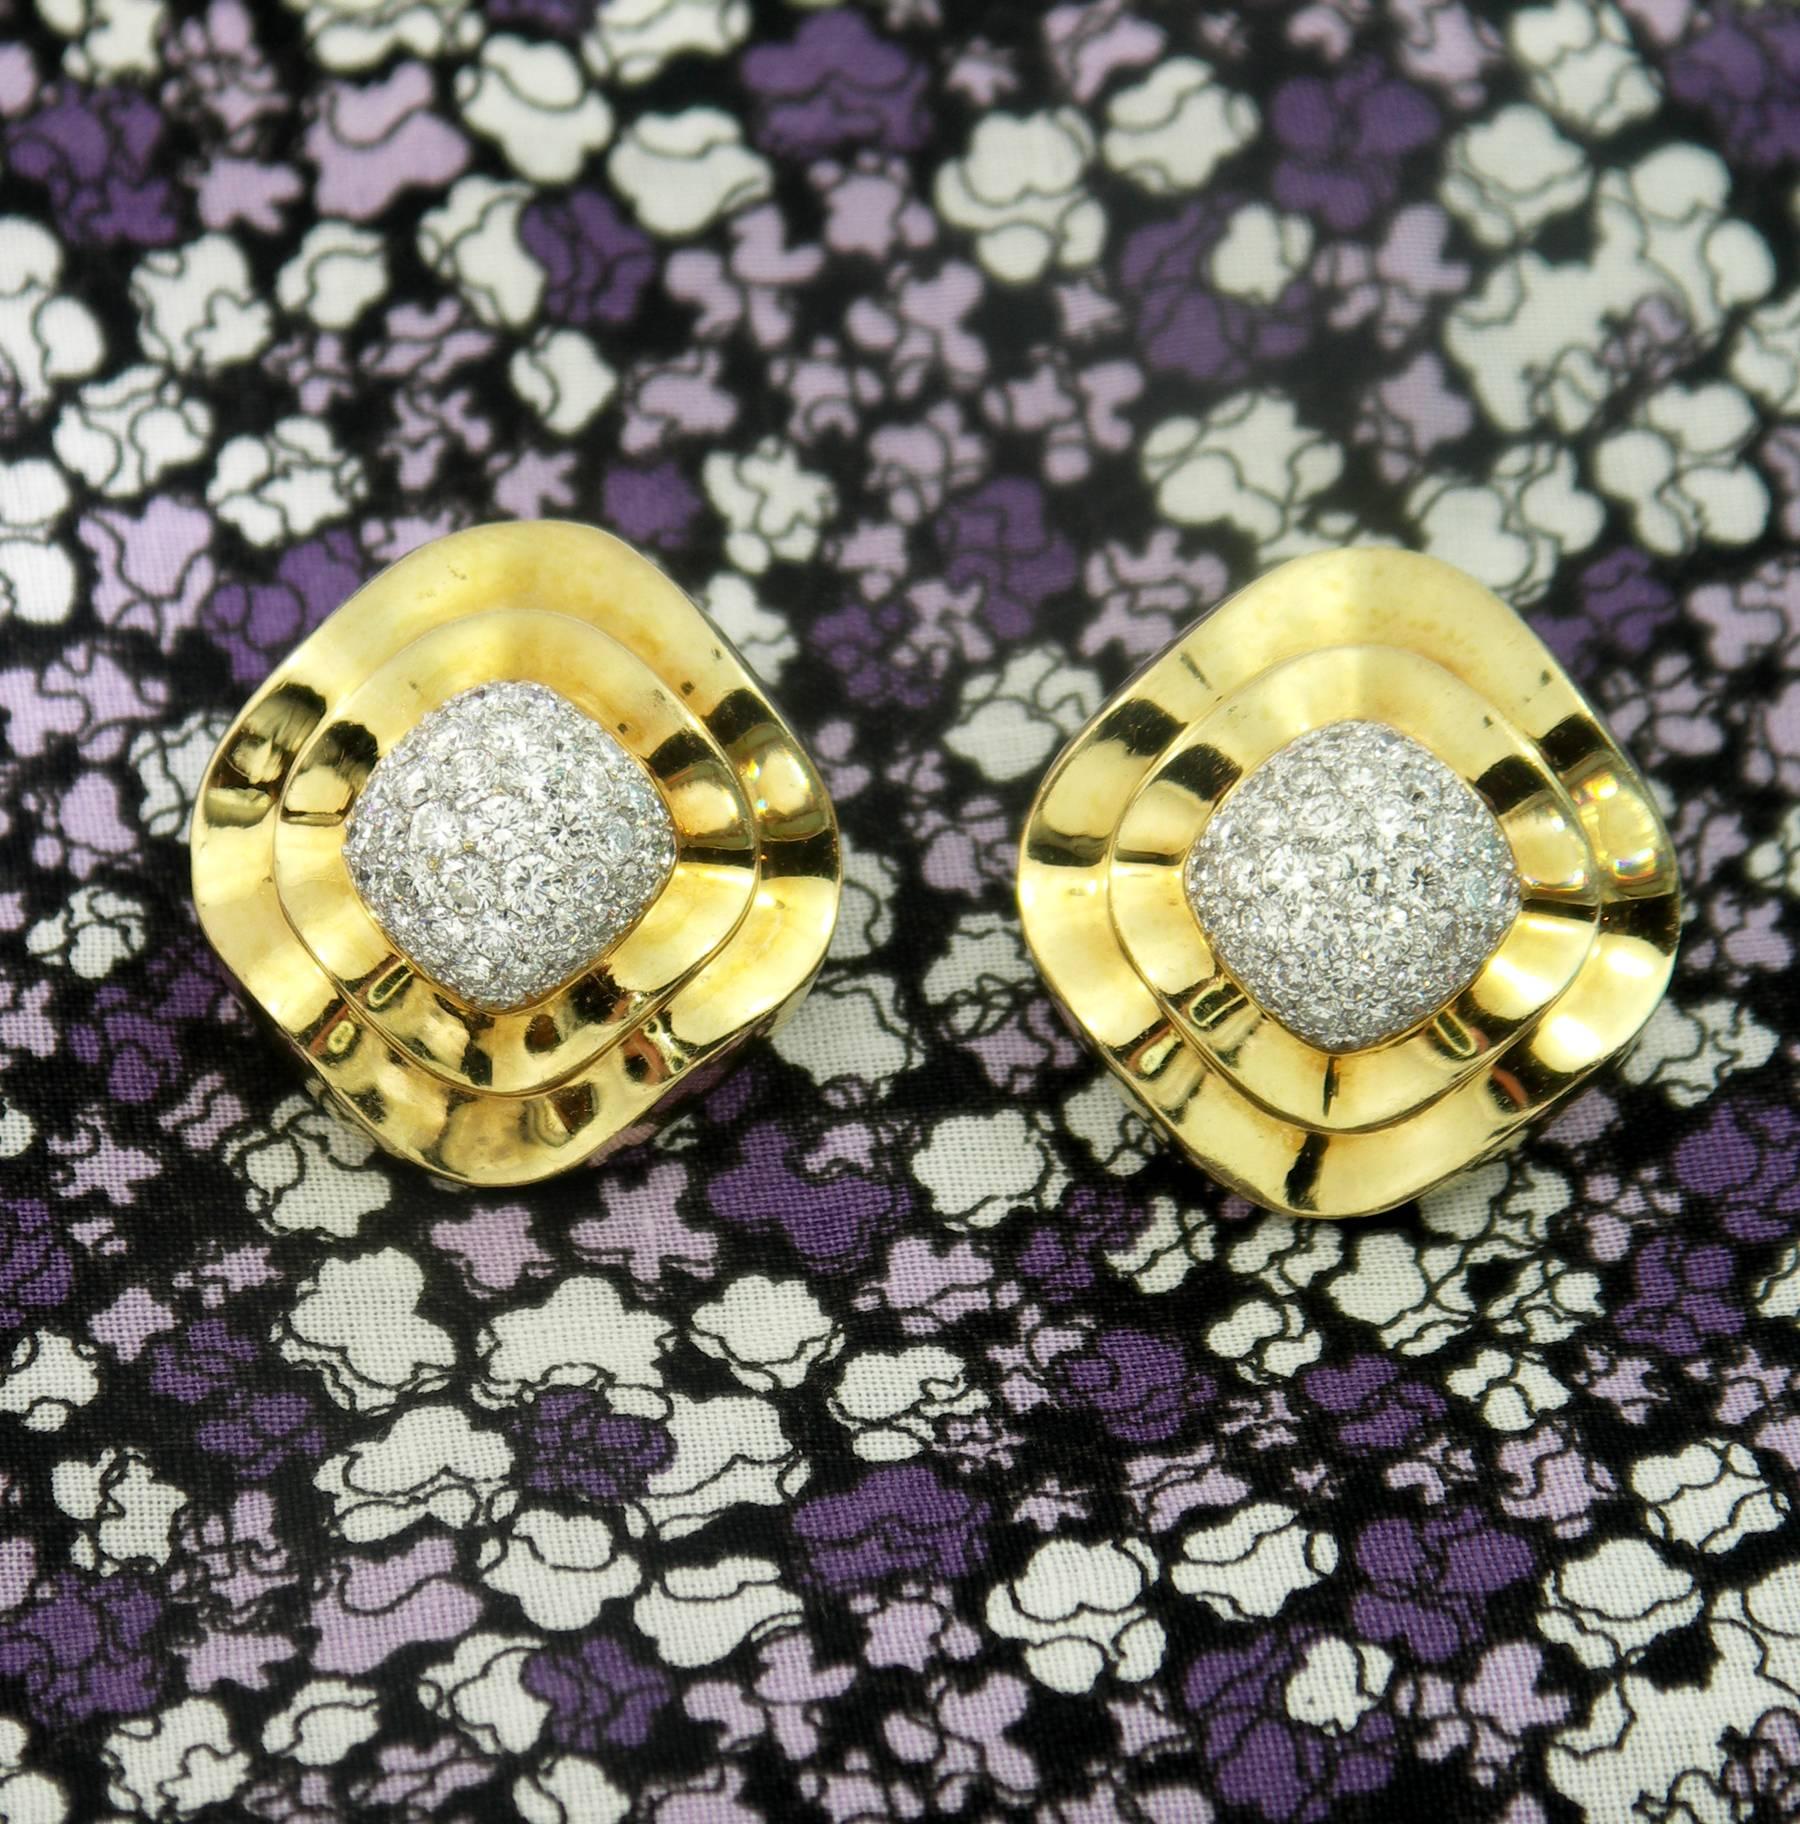 A pair of 18K yellow gold earrings, featuring a swooping design, with a total of approximately 4.5ct of round brilliant cut diamonds of overall F/G color, and VVS2/VS1 clarity. The pave set domes are constructed of 18K white gold, and the gallery is